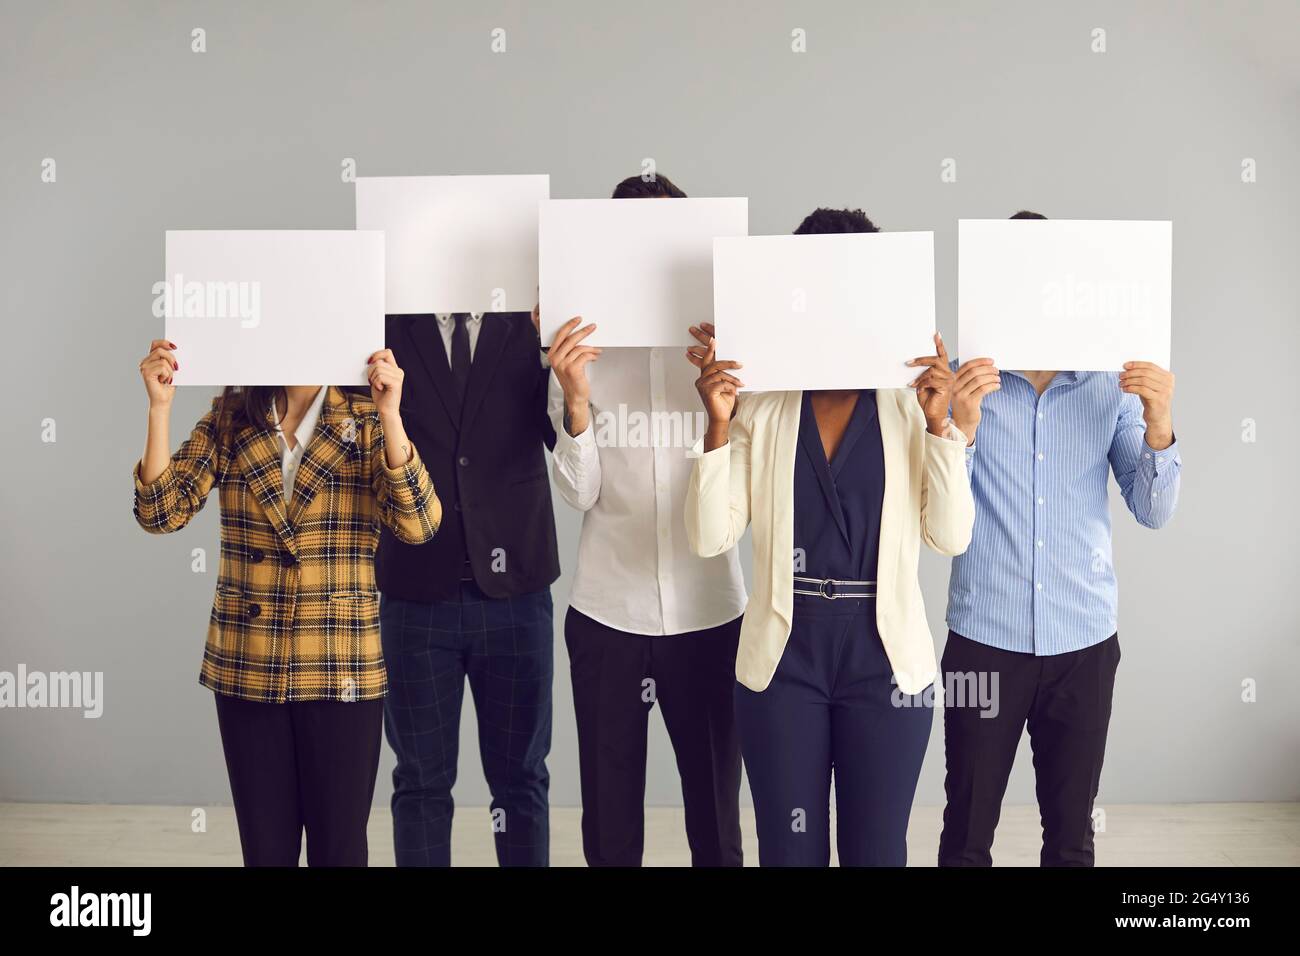 Group of anonymous people covering faces hiding behind white mockup sheets of paper Stock Photo